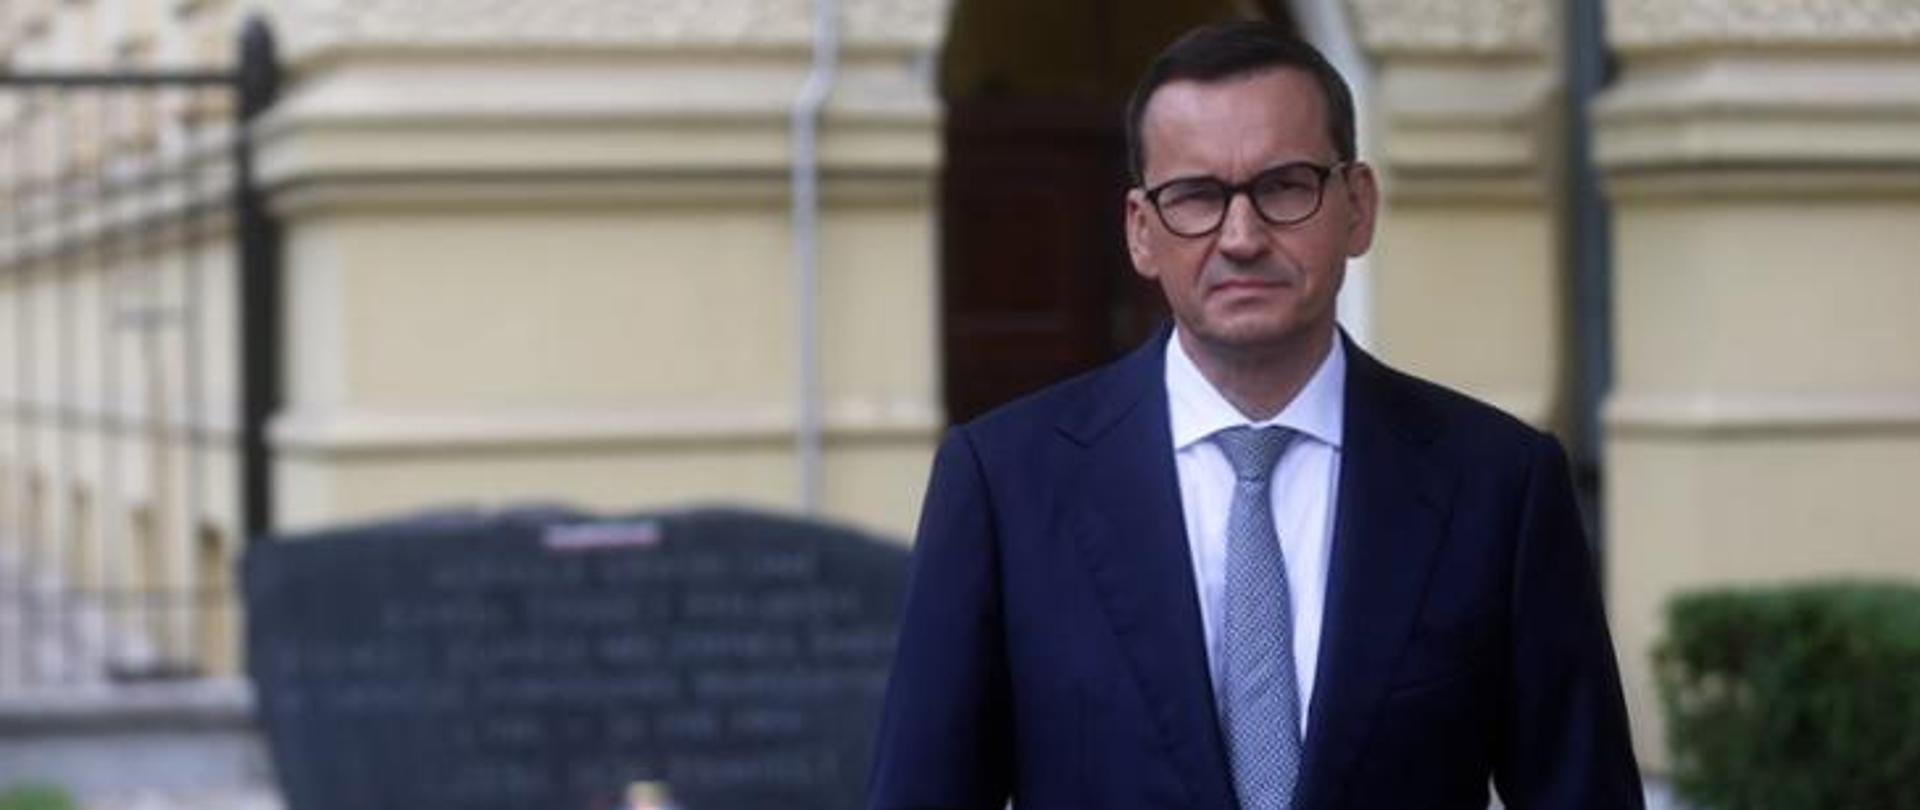 Prime Minister Mateusz Morawiecki appeals to Warsaw Mayor to sign a joint letter